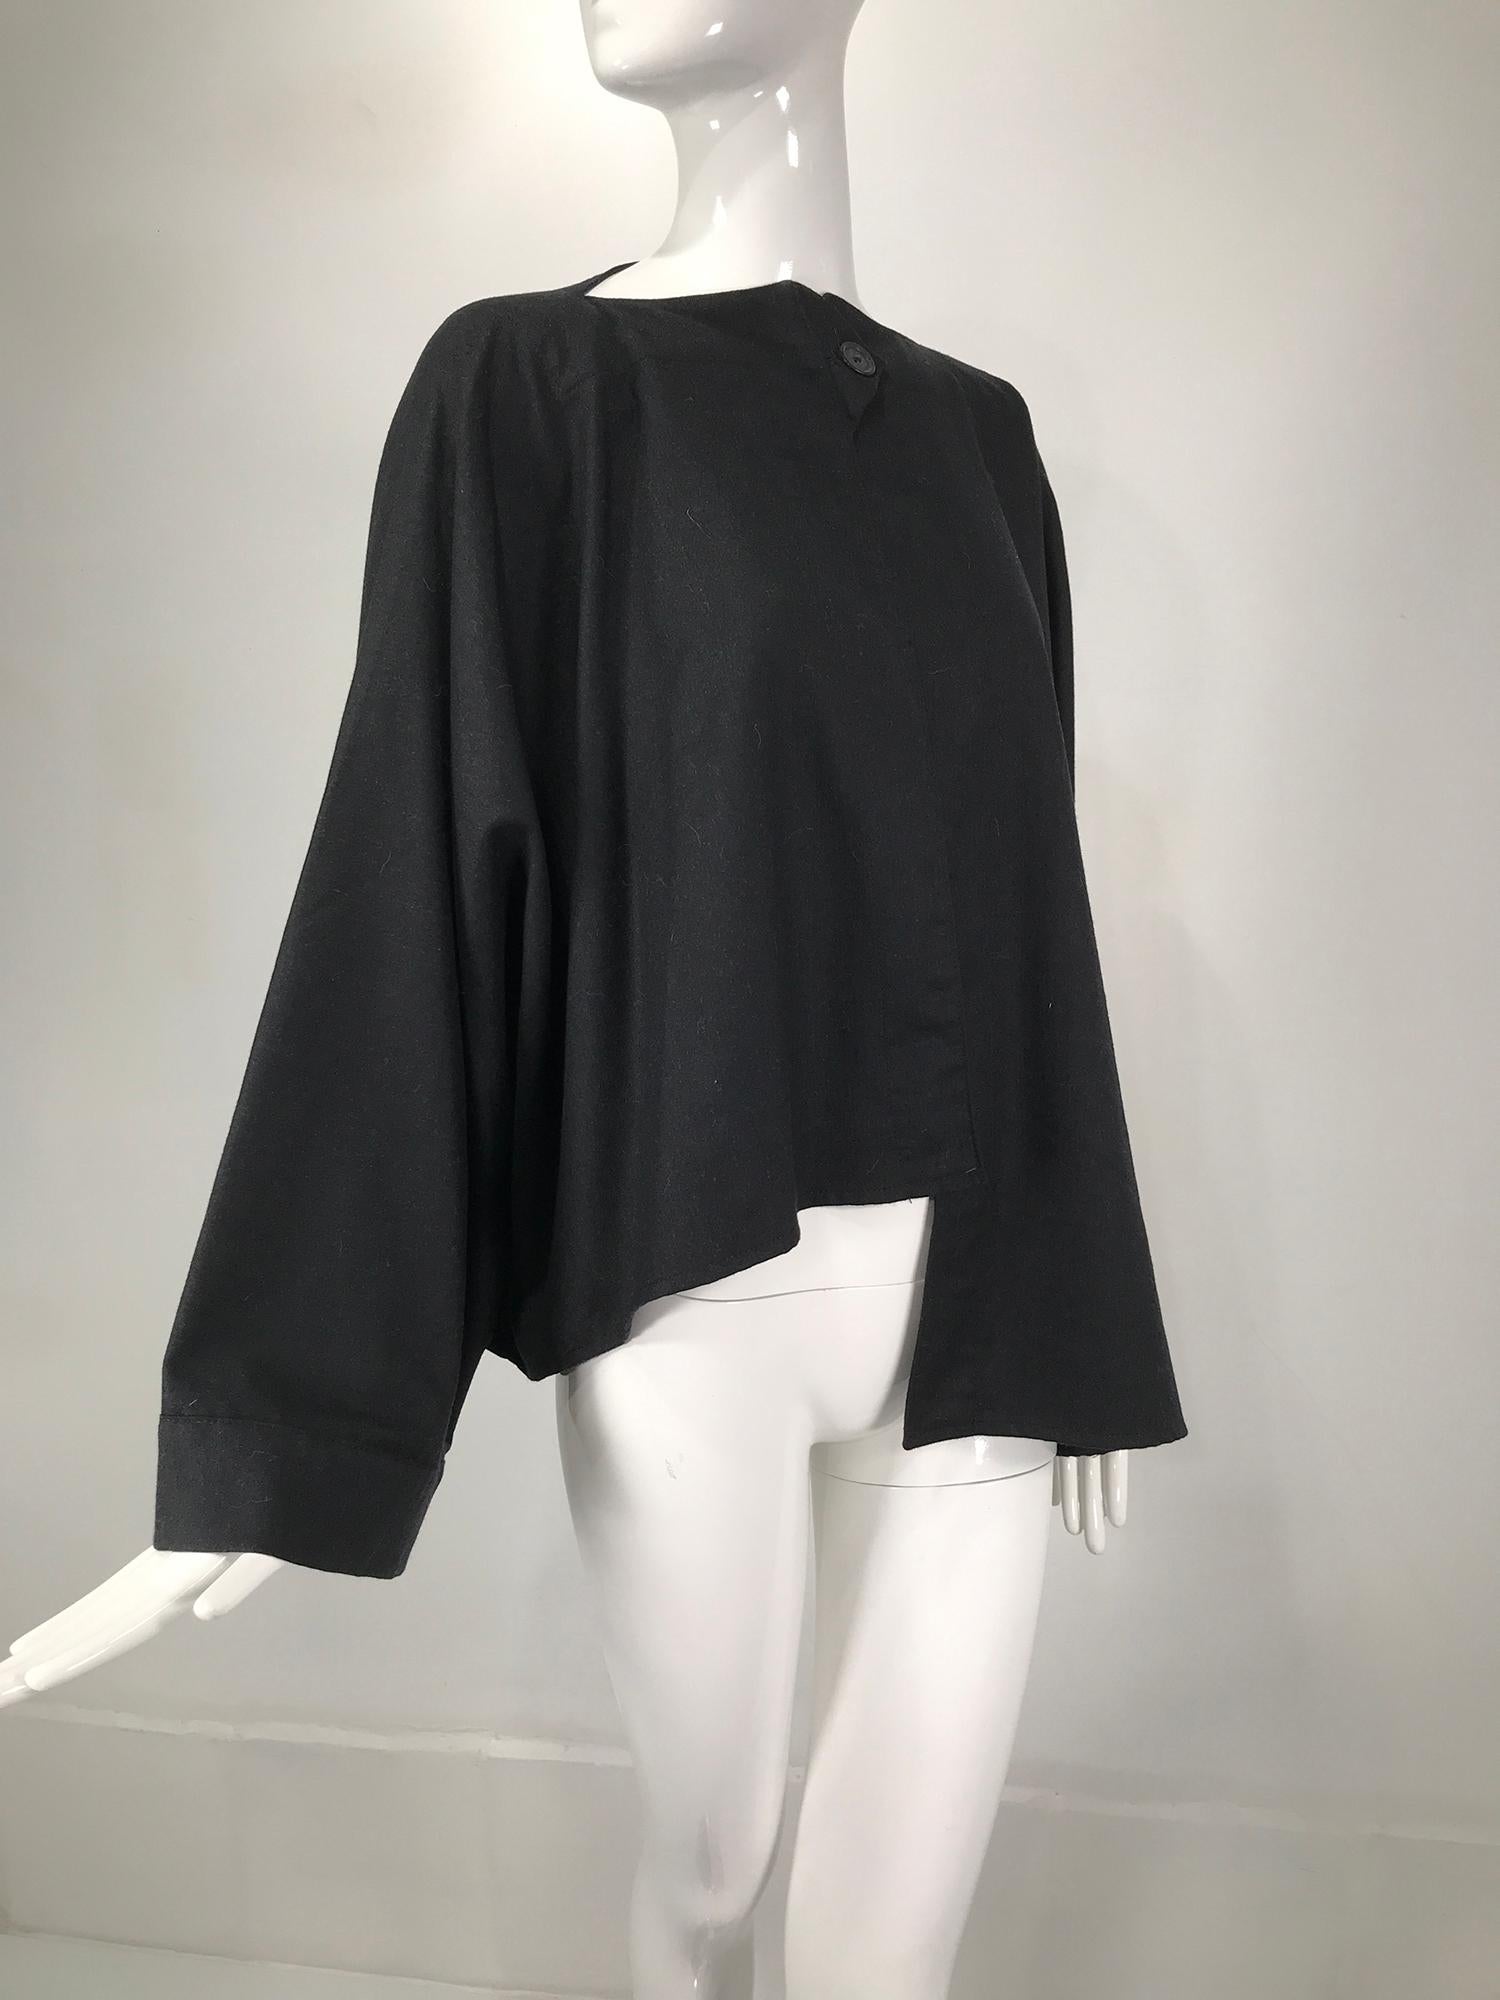 Ivan Grundahl black wool kimono sleeve asymmetrical hem jacket. Single button closure at the neck, button & tab. Fine, lightweight wool with wide kimono sleeves, open front, full flared back. Unlined. Perfect for layering. Fits a size small-medium.